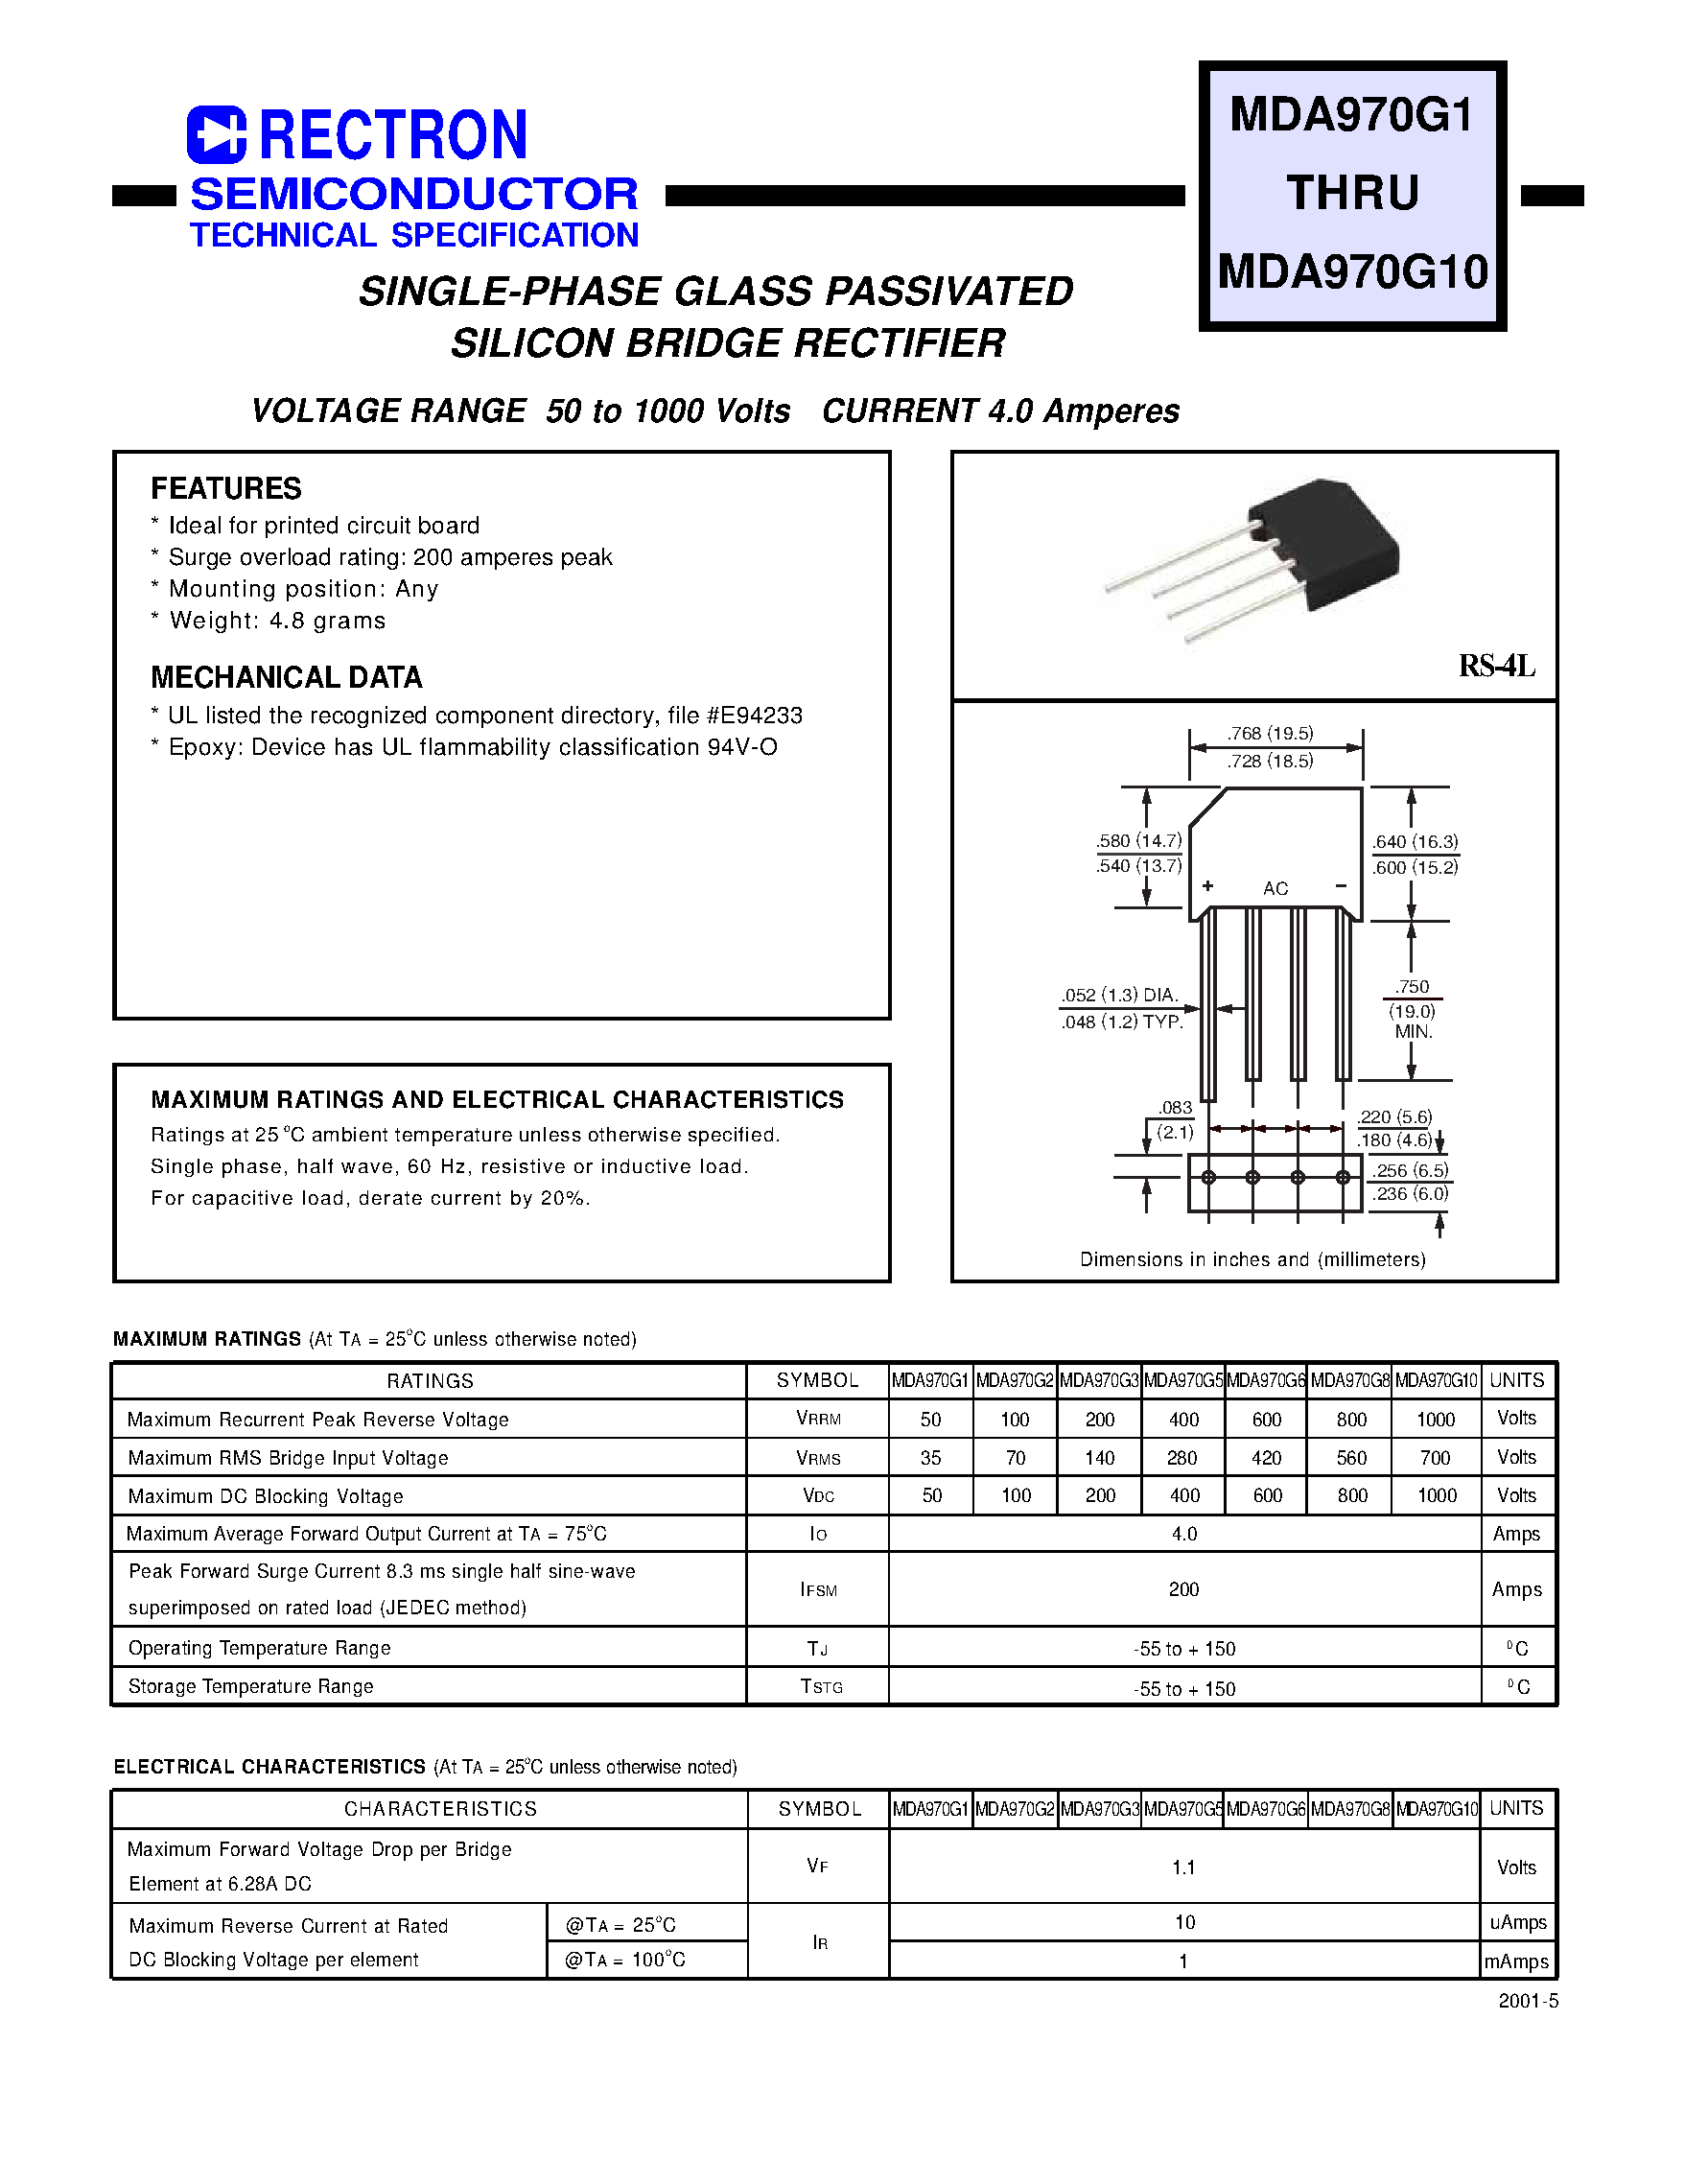 Даташит MDA970G3 - SINGLE-PHASE GLASS PASSIVATED SILICON BRIDGE RECTIFIER (VOLTAGE RANGE 50 to 1000 Volts CURRENT 4.0 Amperes) страница 1